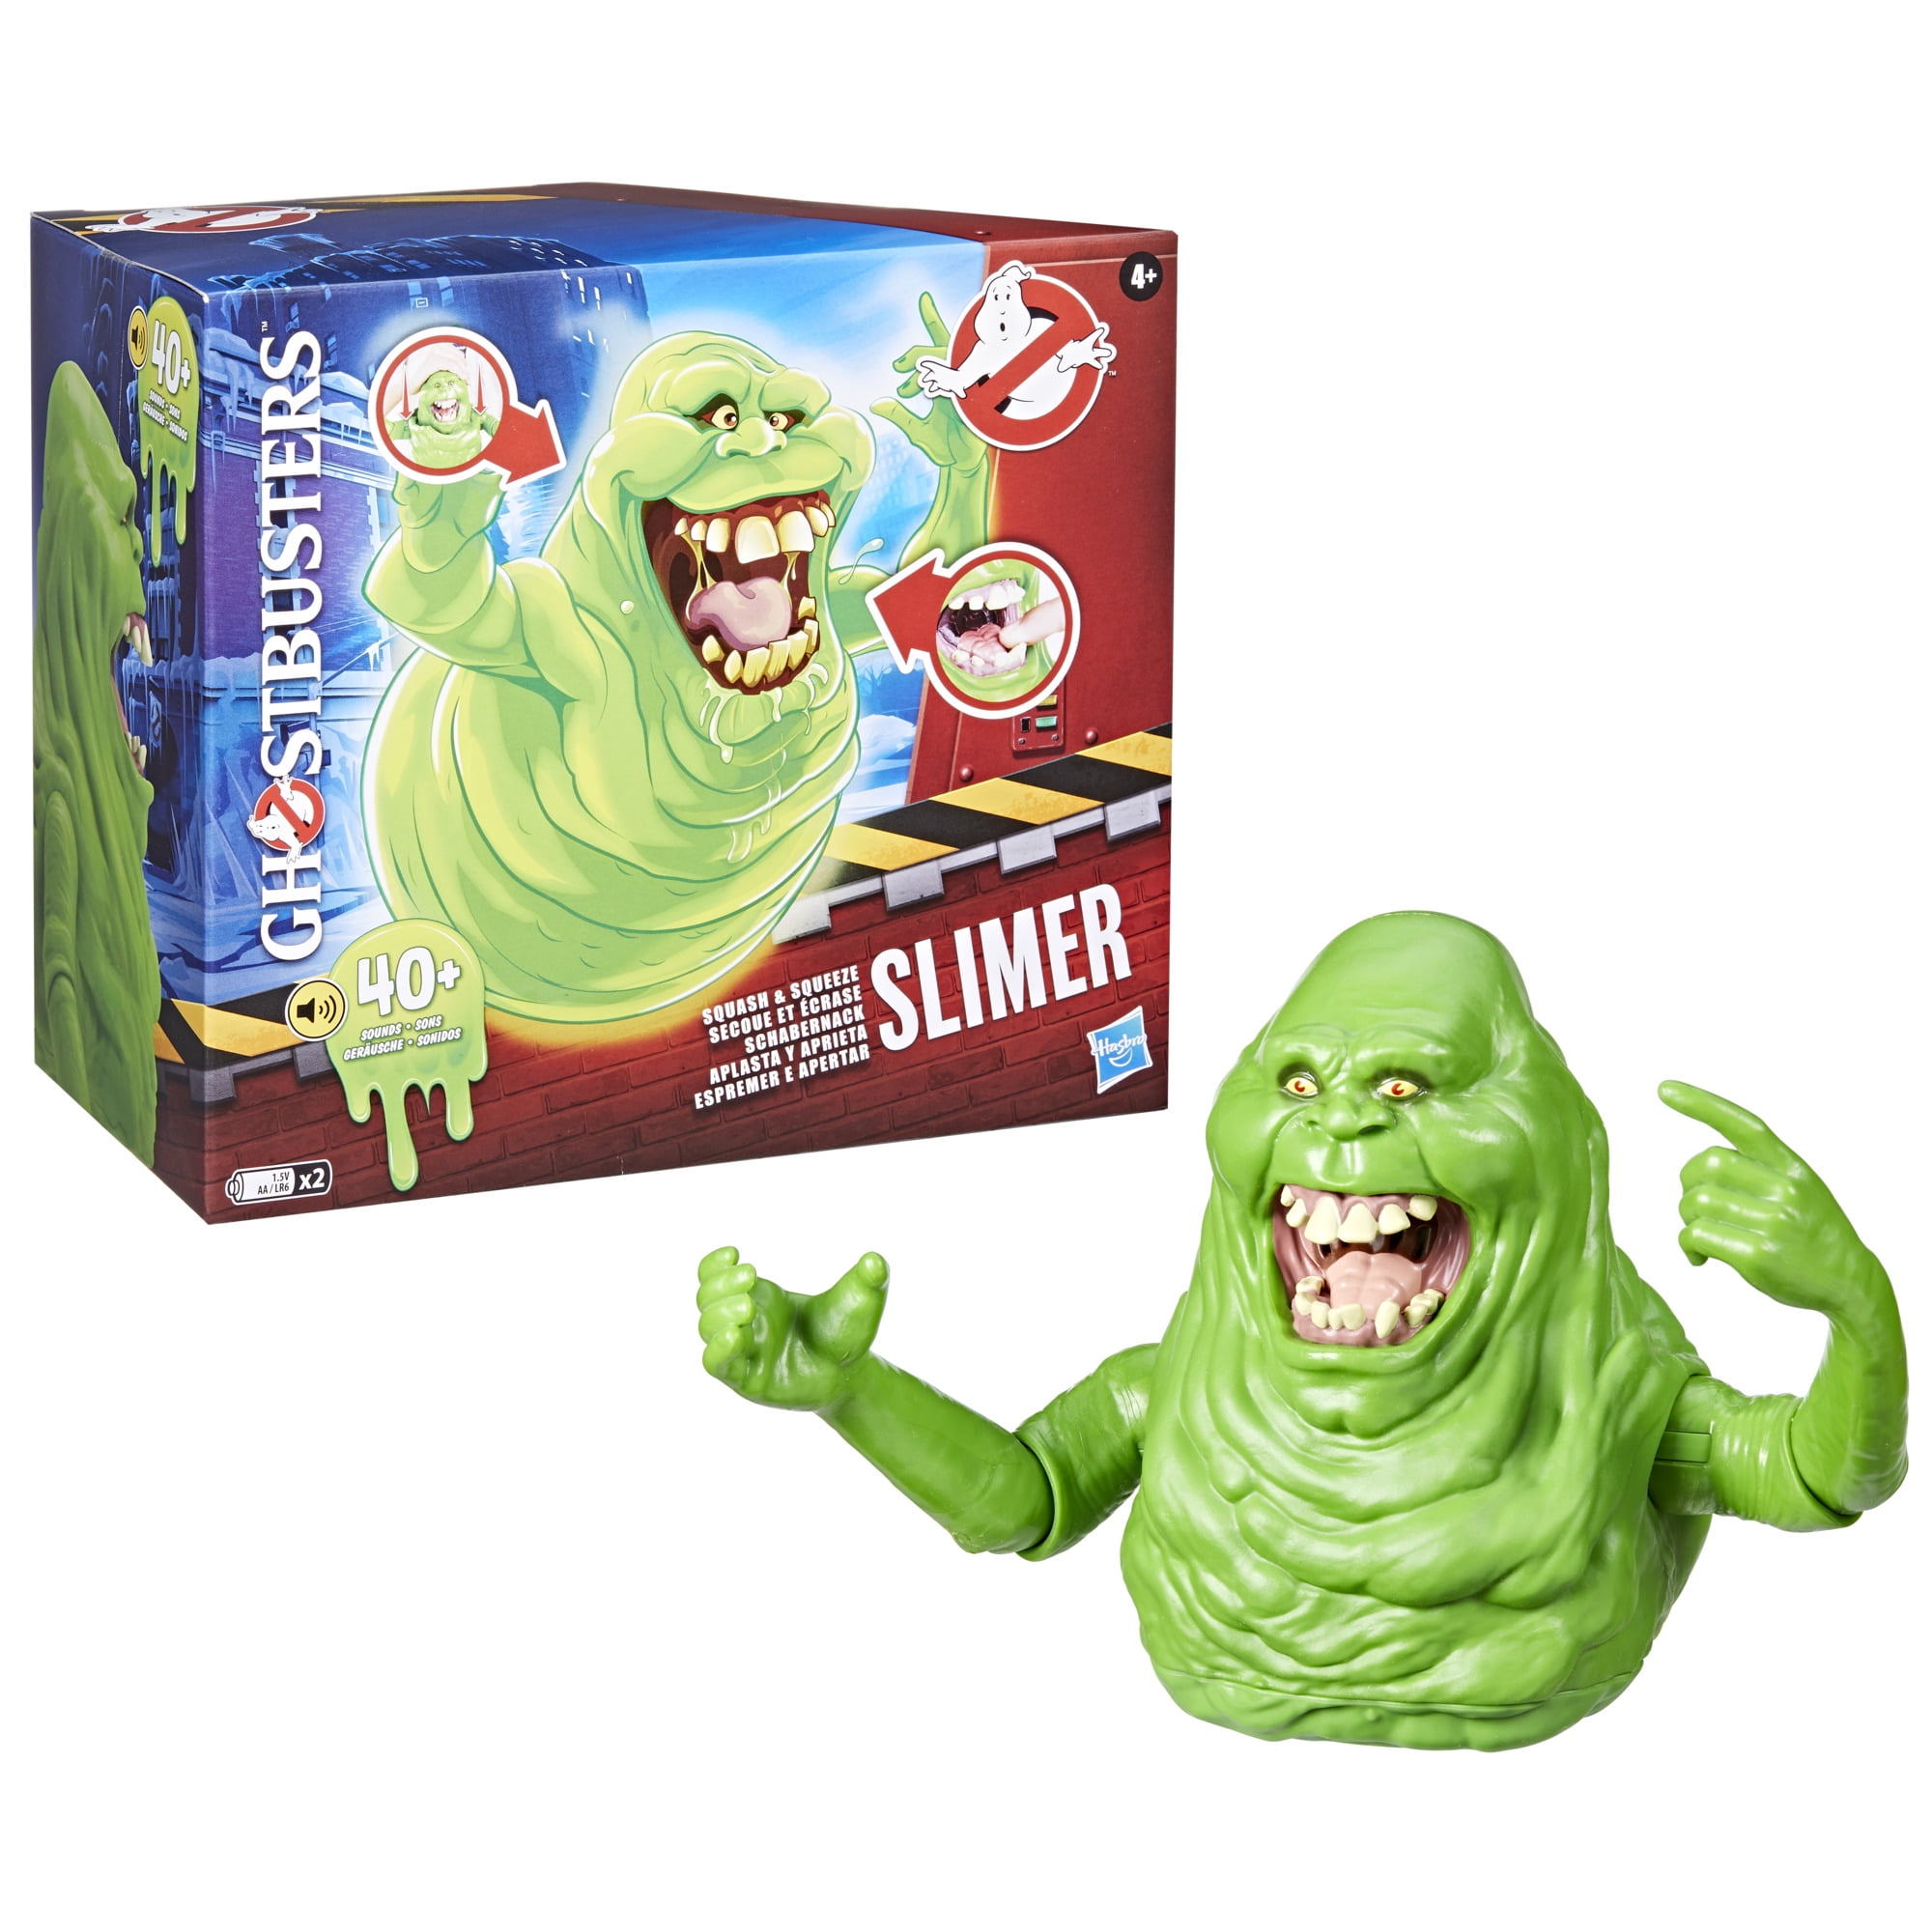 The BEST Slimer toy ever + pre-orders now available